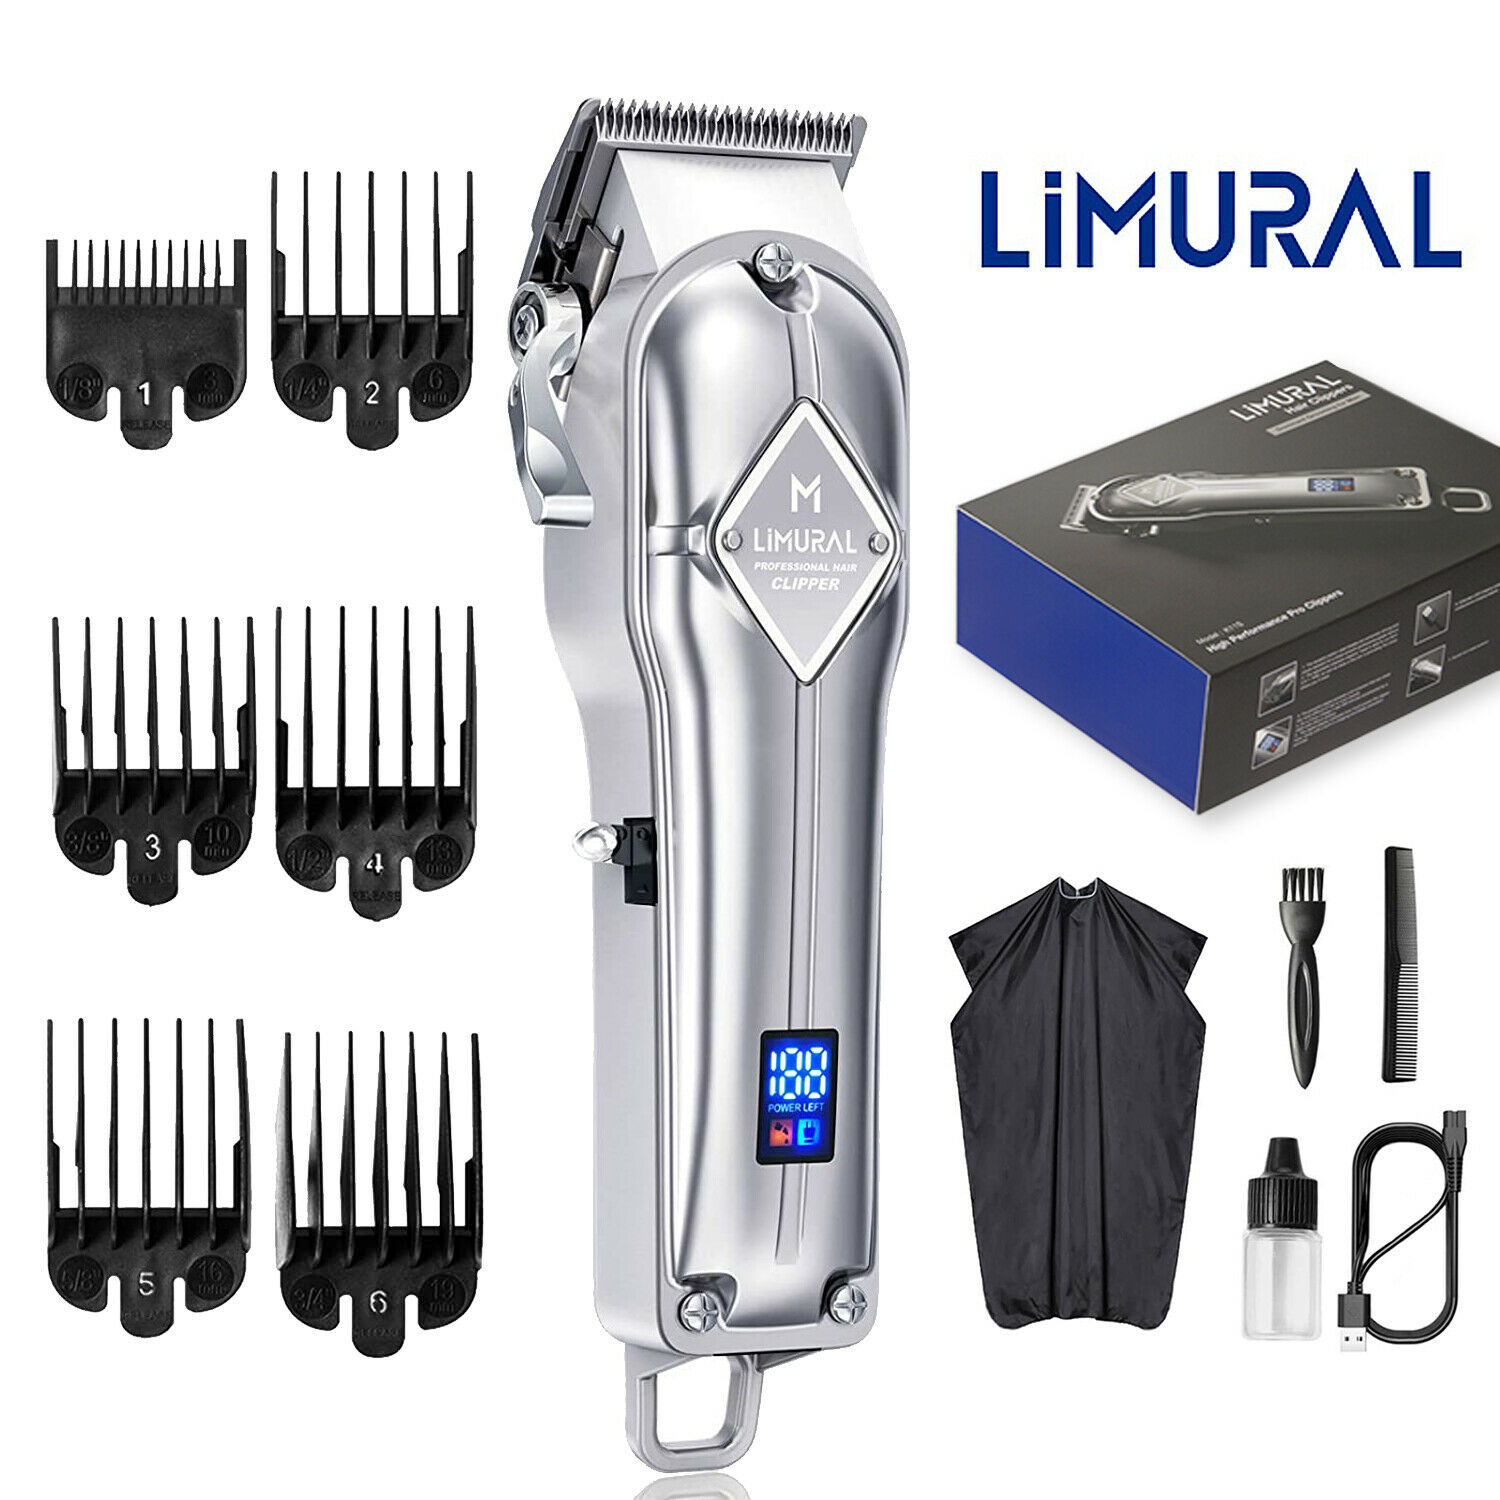 Limural Professional Hair Clippers Cutting Machine Barber Salon Trimmer Kit Men